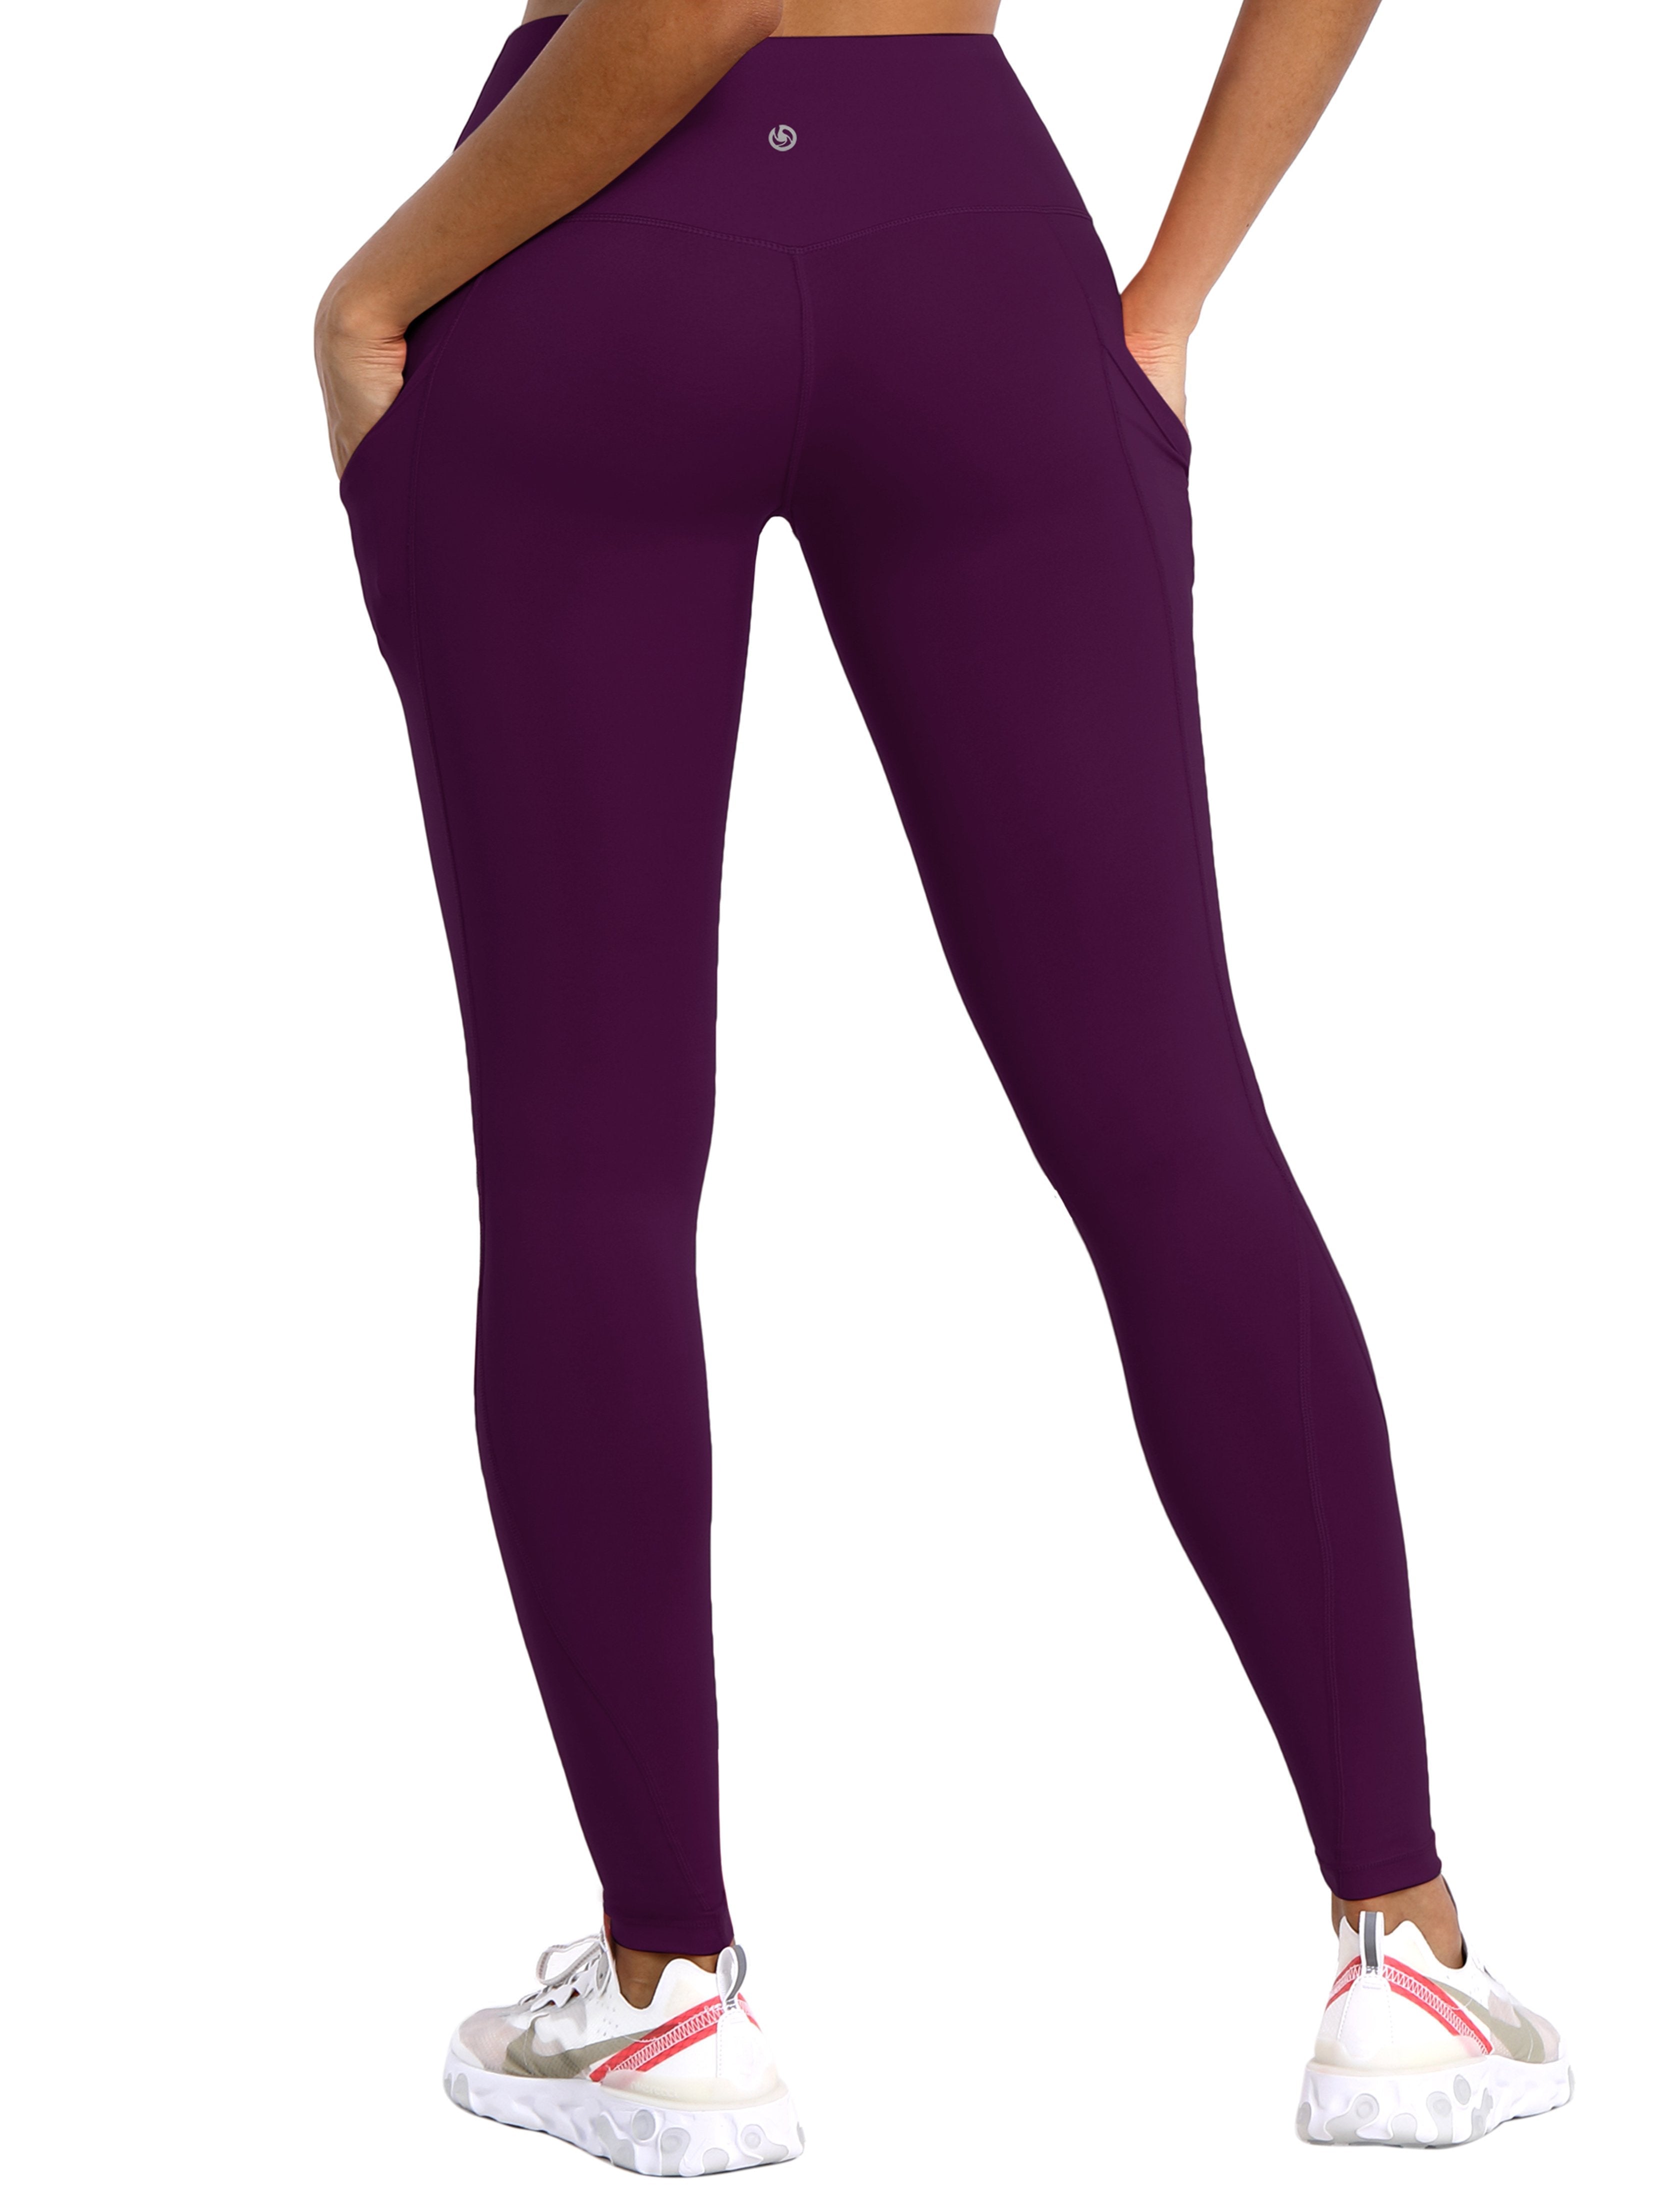 High Waist Side Pockets Plus Size Pants plum 75% Nylon, 25% Spandex Fabric doesn't attract lint easily 4-way stretch No see-through Moisture-wicking Tummy control Inner pocket